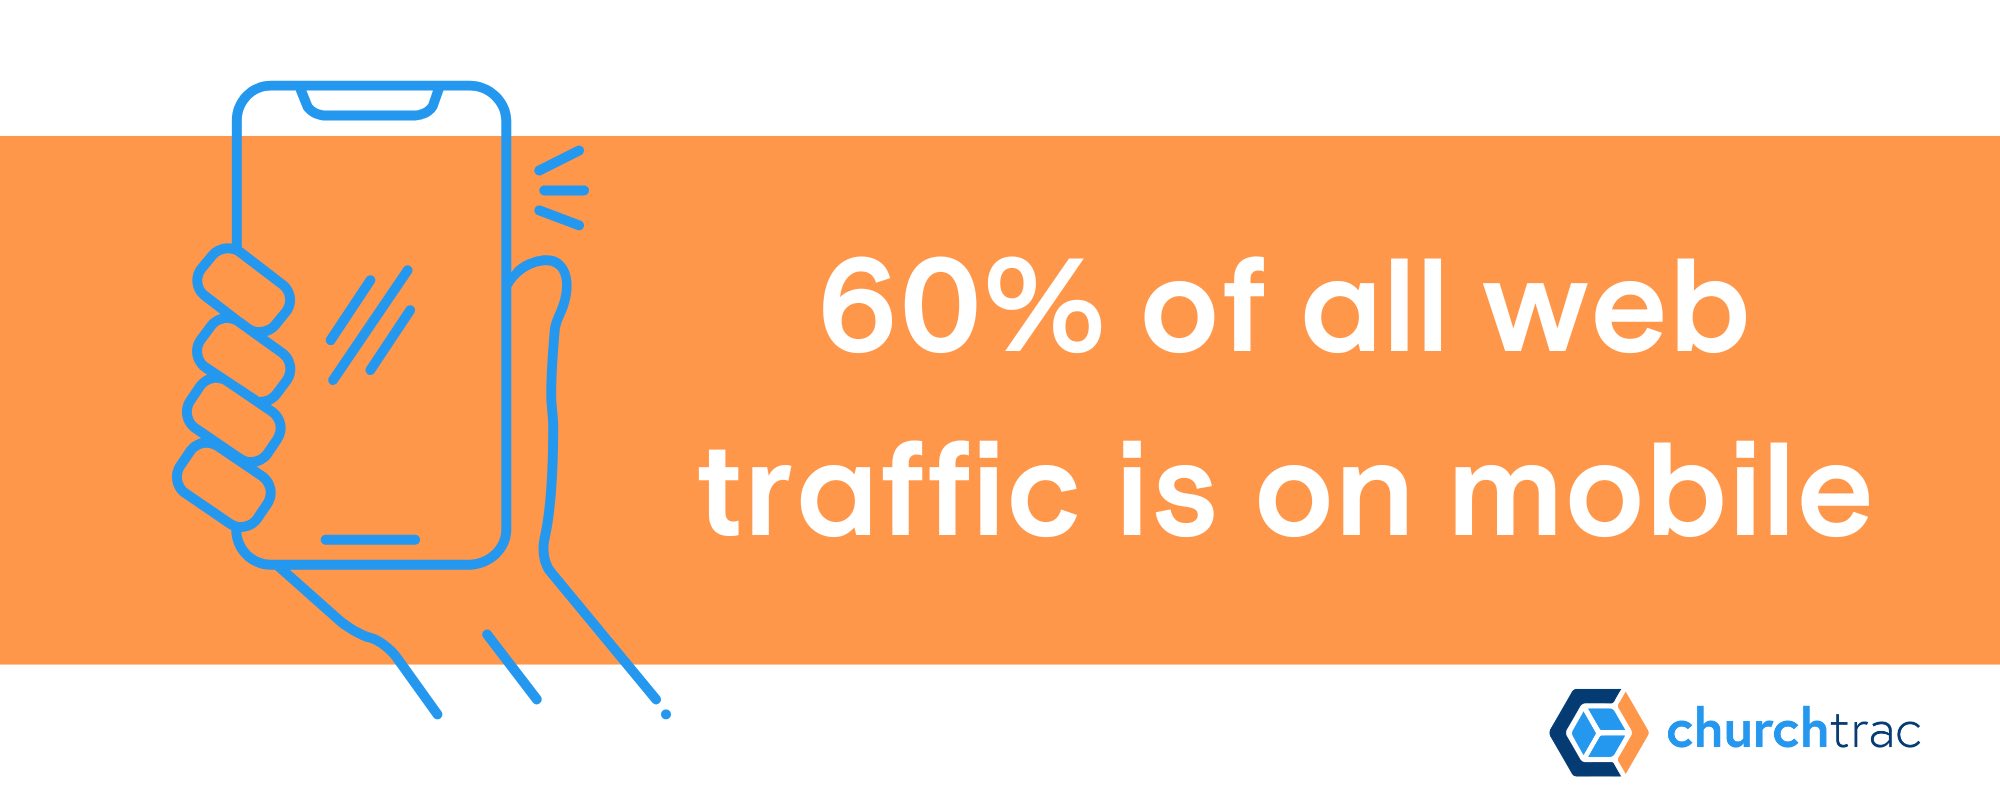 60% of all web traffic is on mobile devices